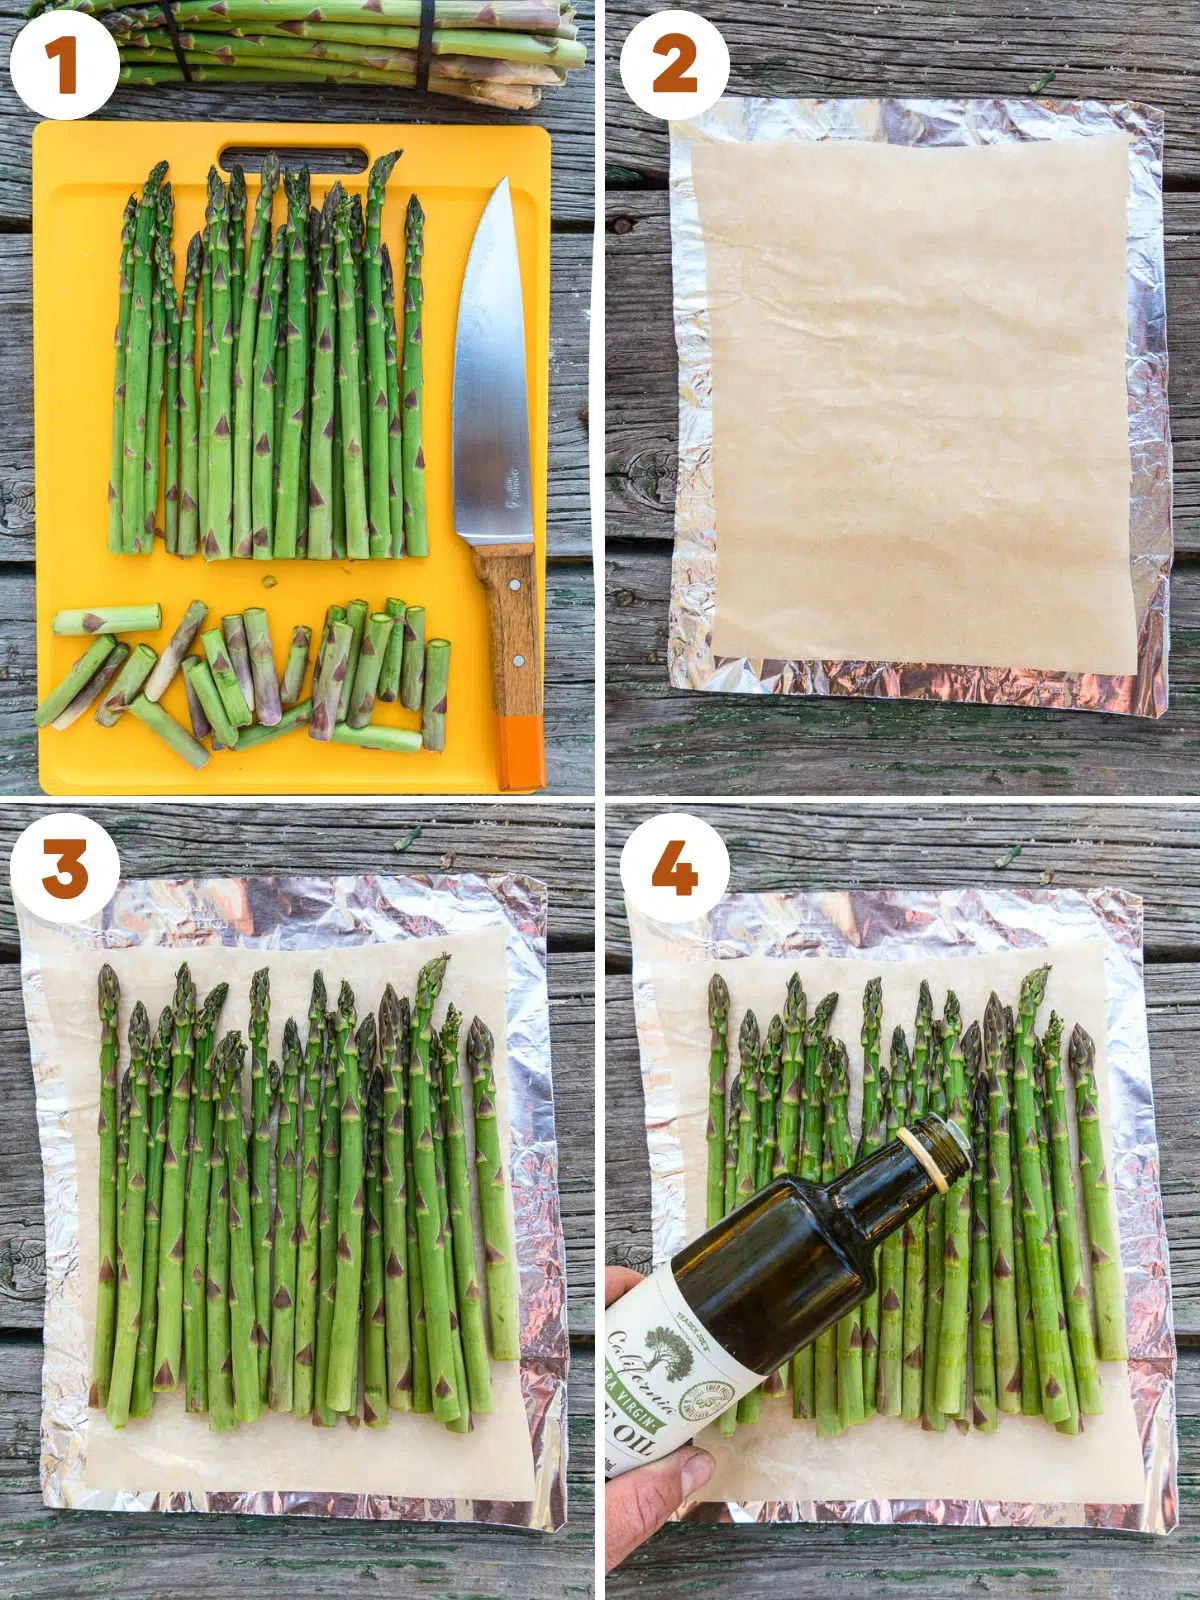 Steps to making grilled asparagus